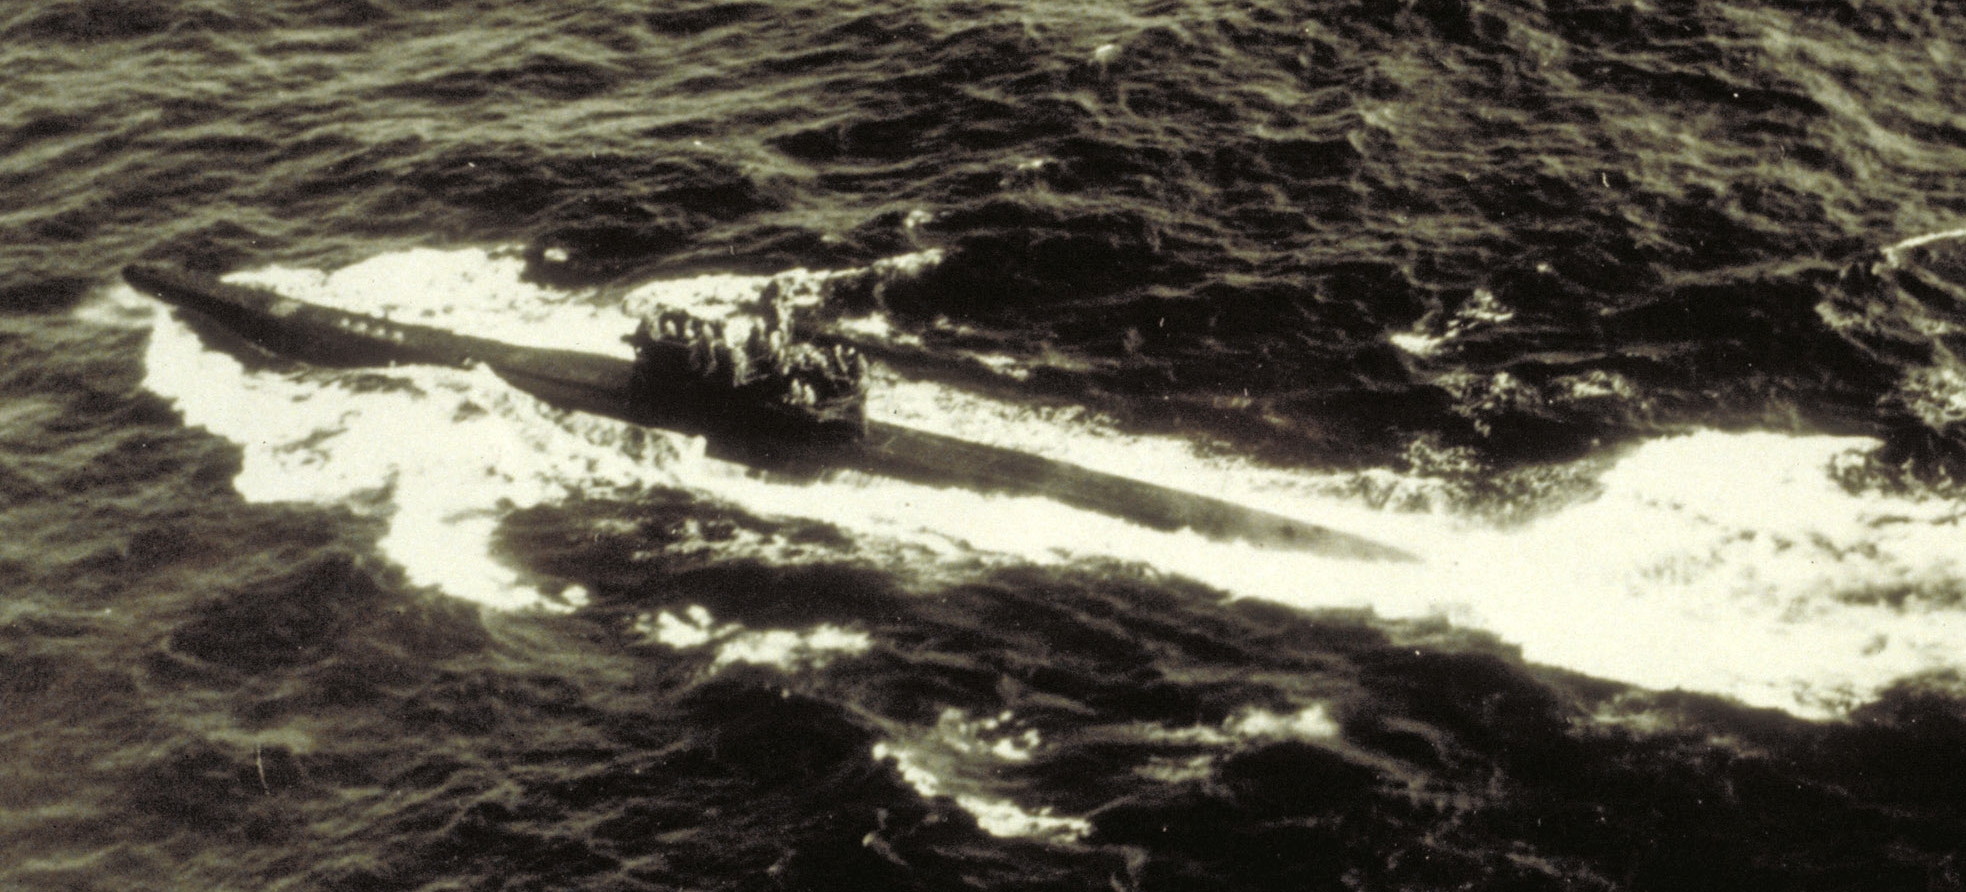 U-1105 at the time of its surrender